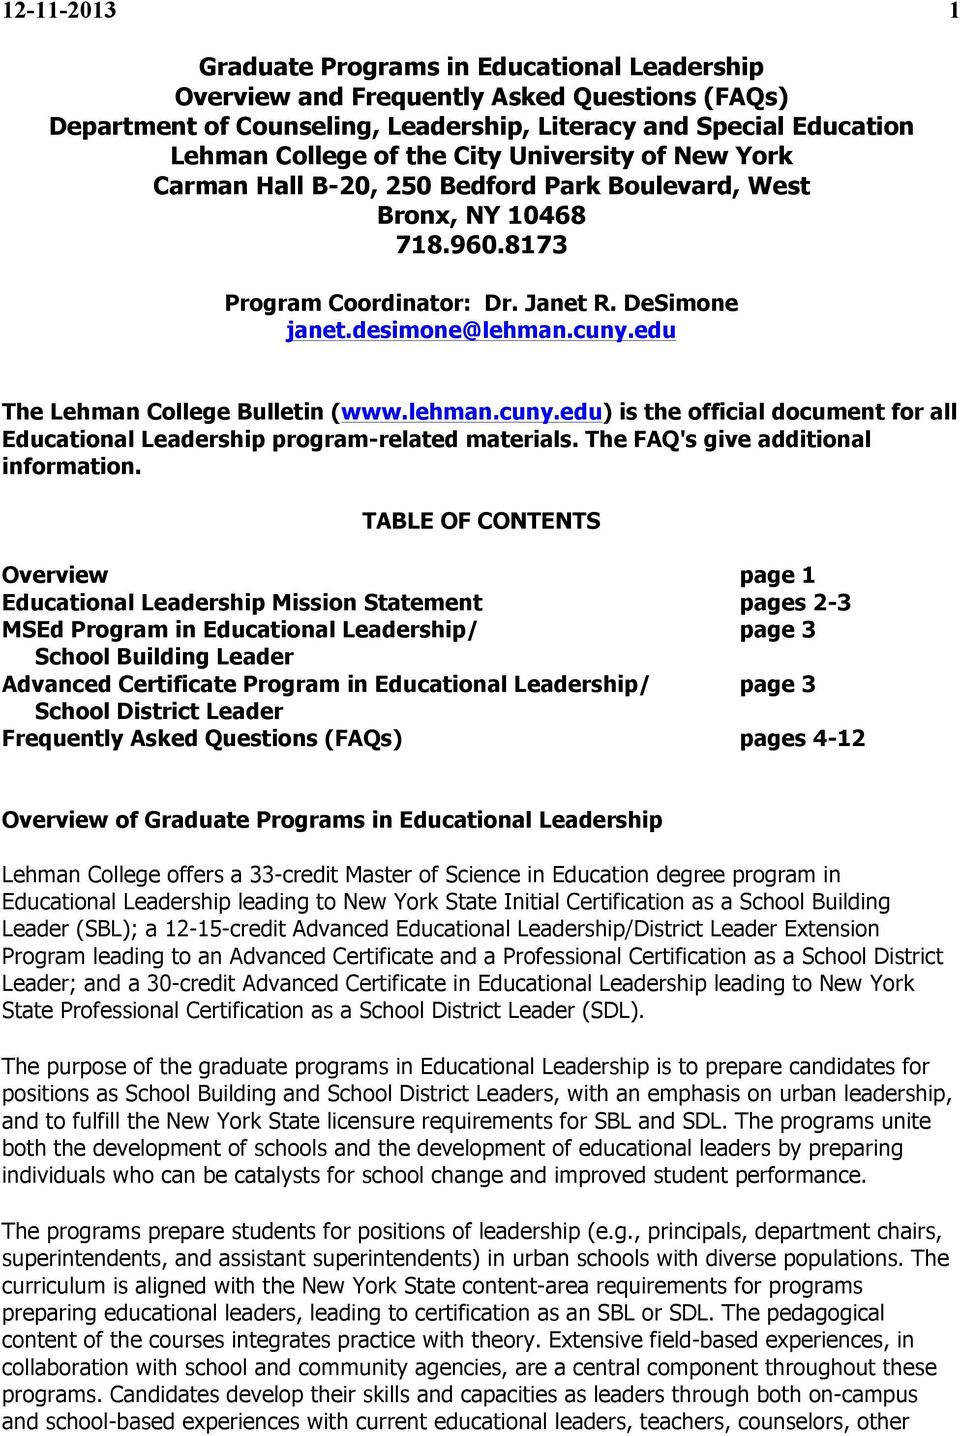 edu The Lehman College Bulletin (www.lehman.cuny.edu) is the official document for all Educational Leadership program-related materials. The FAQ's give additional information.